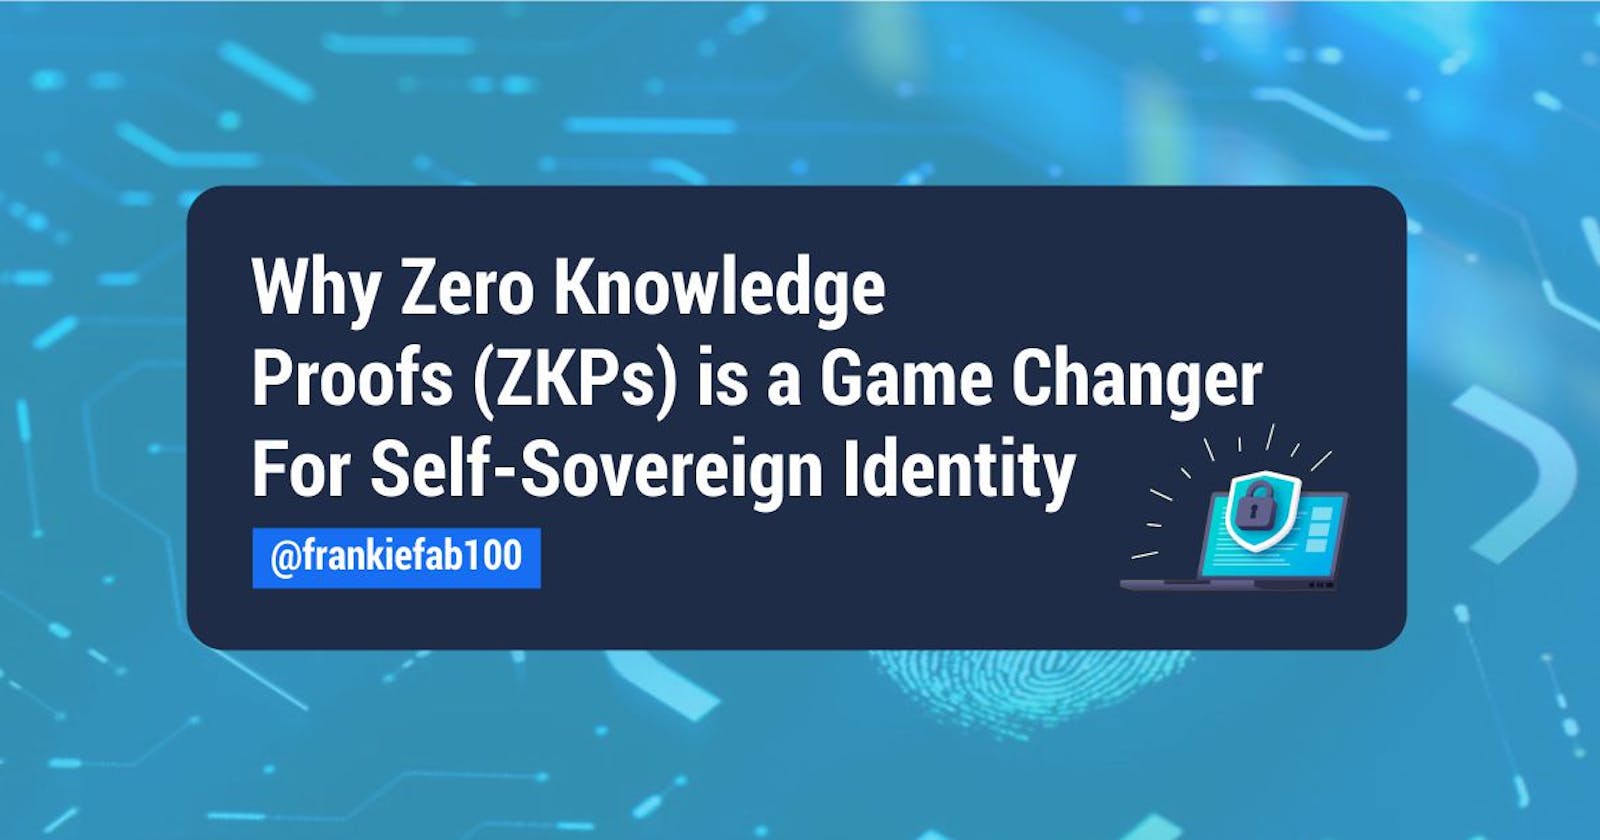 Why Zero Knowledge Proofs (ZKPs) is a Game Changer for Self-Sovereign Identity